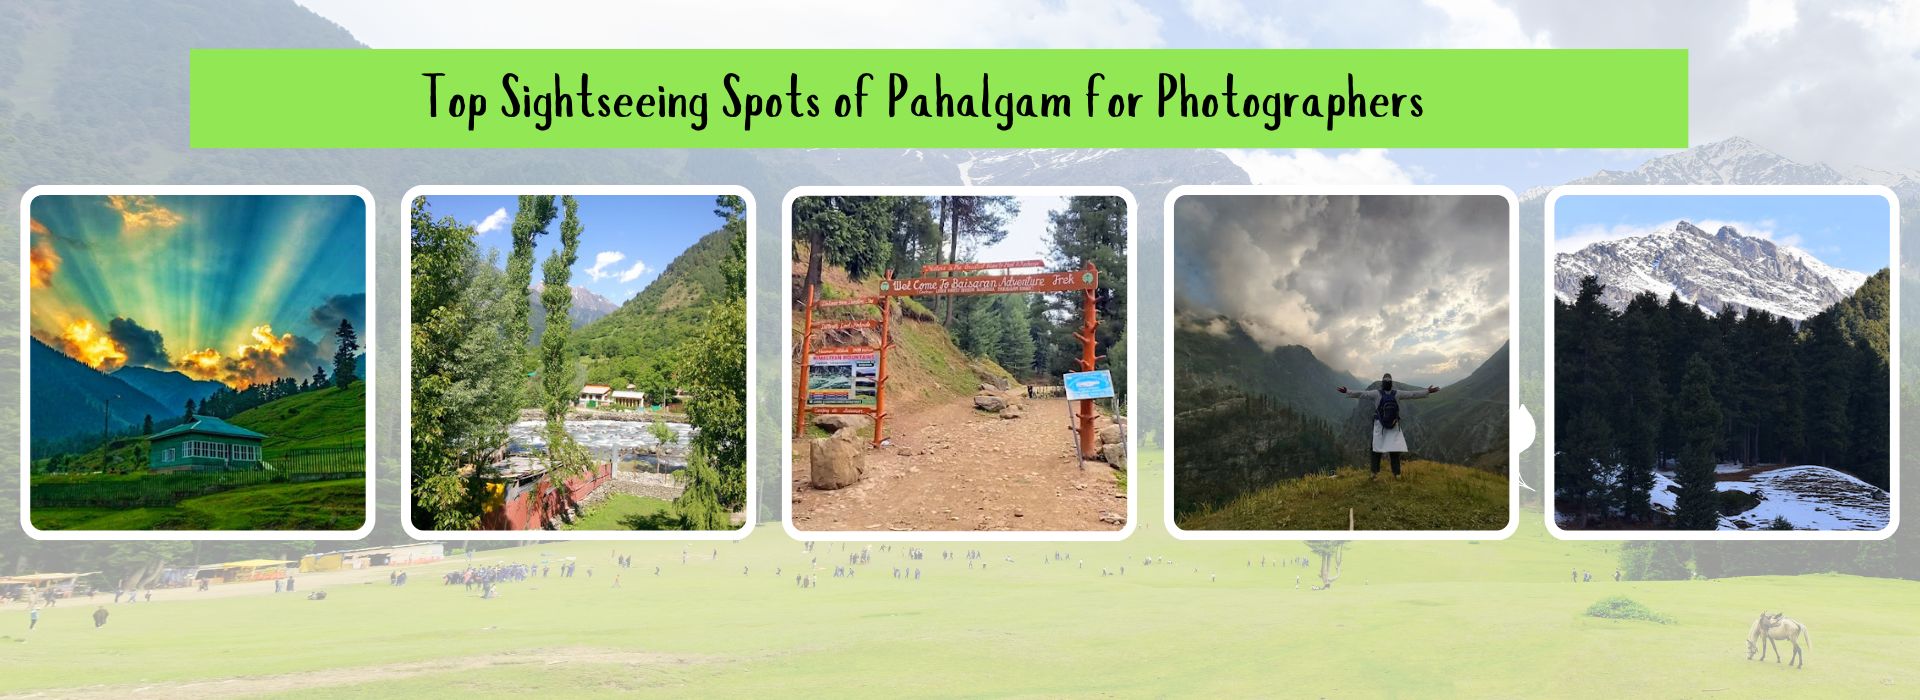 Top Sightseeing Spots of Pahalgam for Photographers